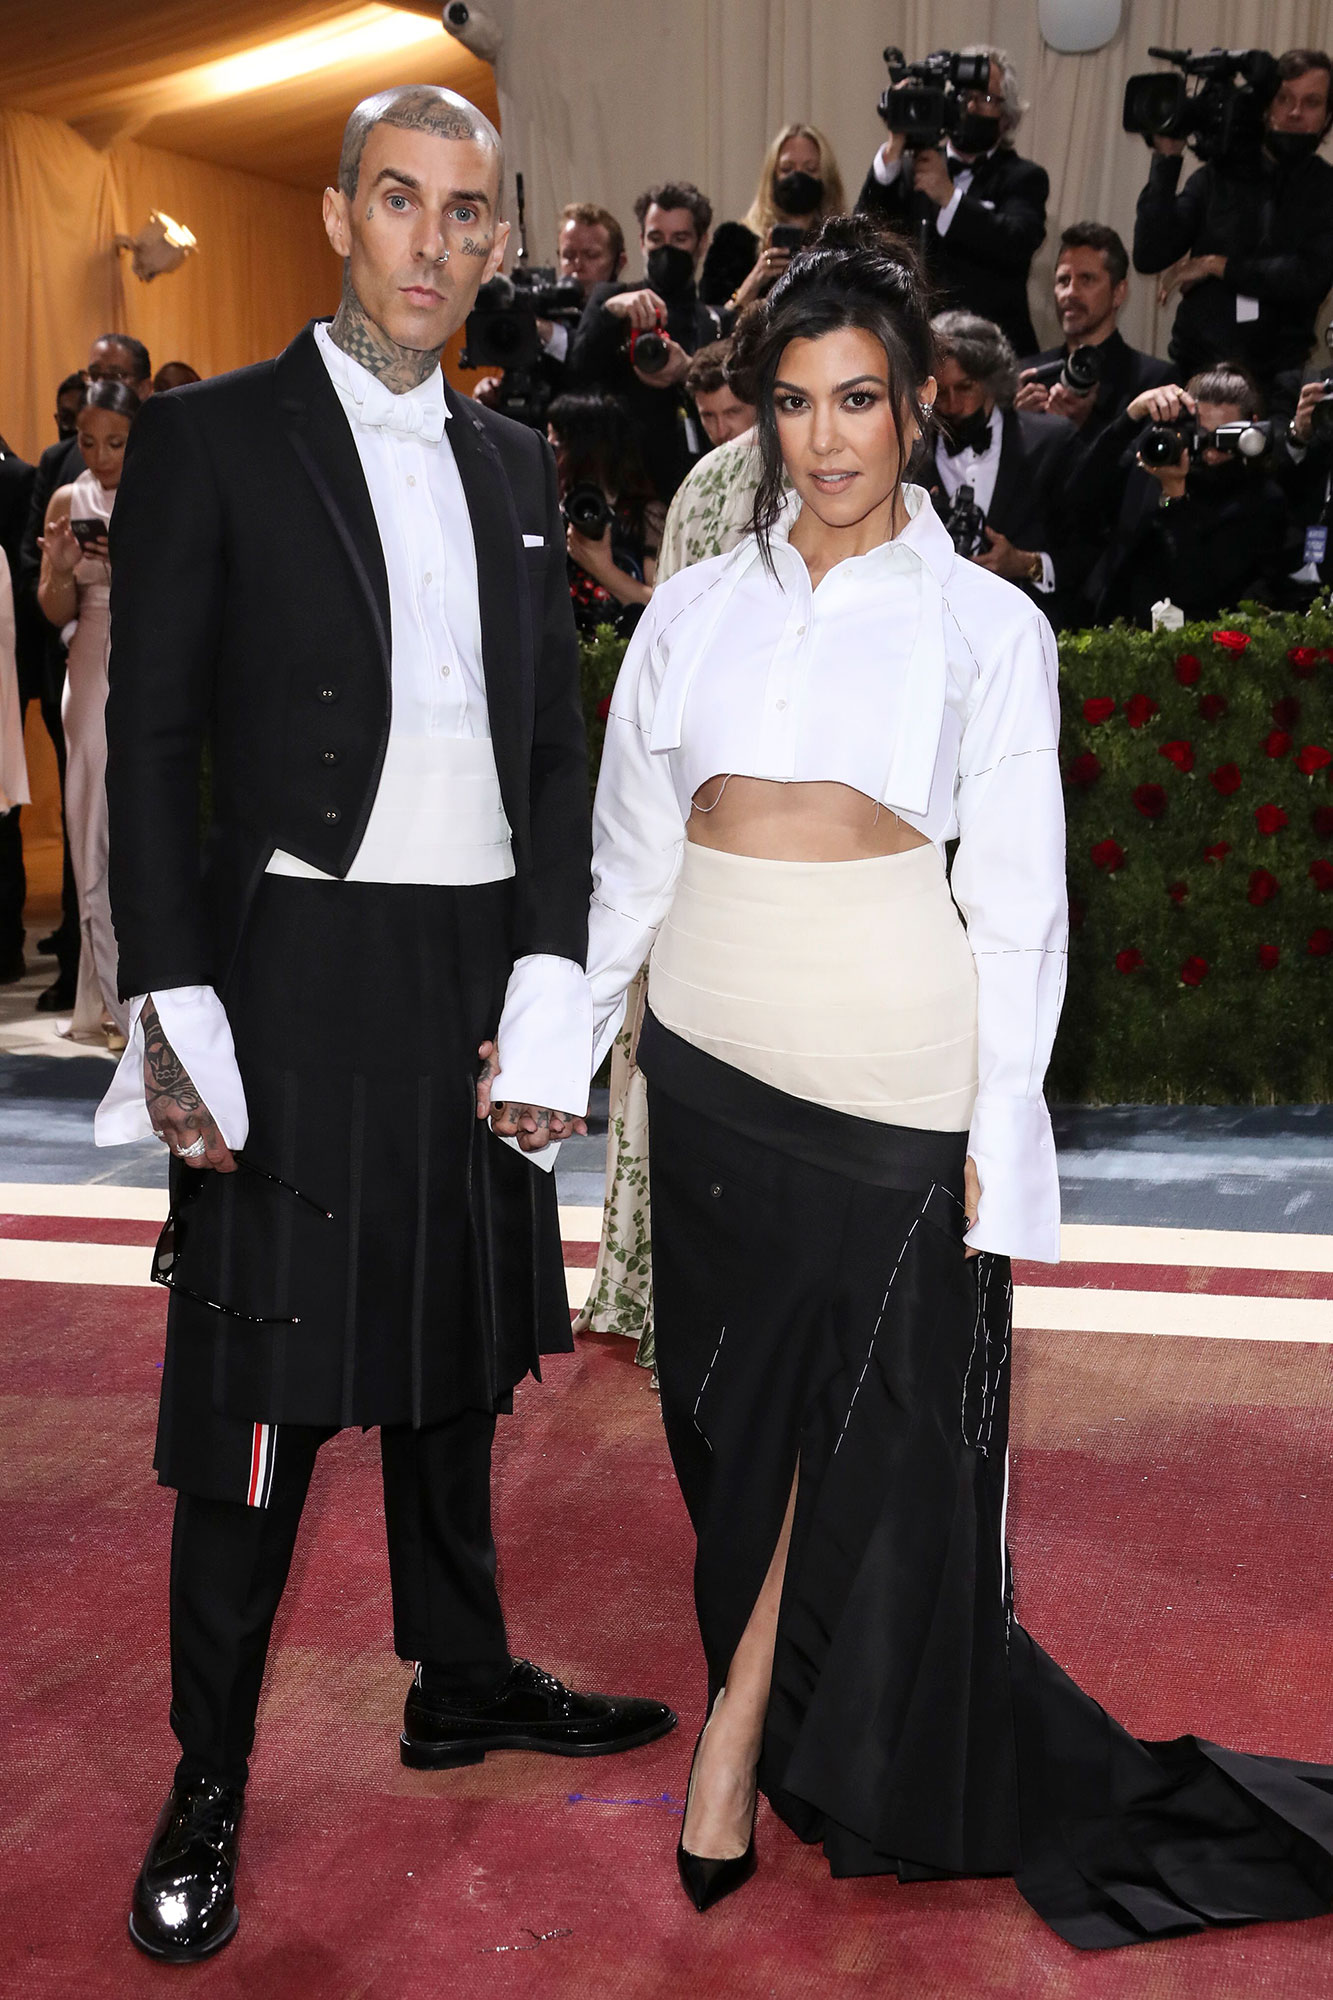 Feature Kourtney Kardashian And Travis Barker Pack On The PDA At 2022 Met Gala 2022 After Skipping The Event 1 Year Prior ?w=1333&quality=86&strip=all